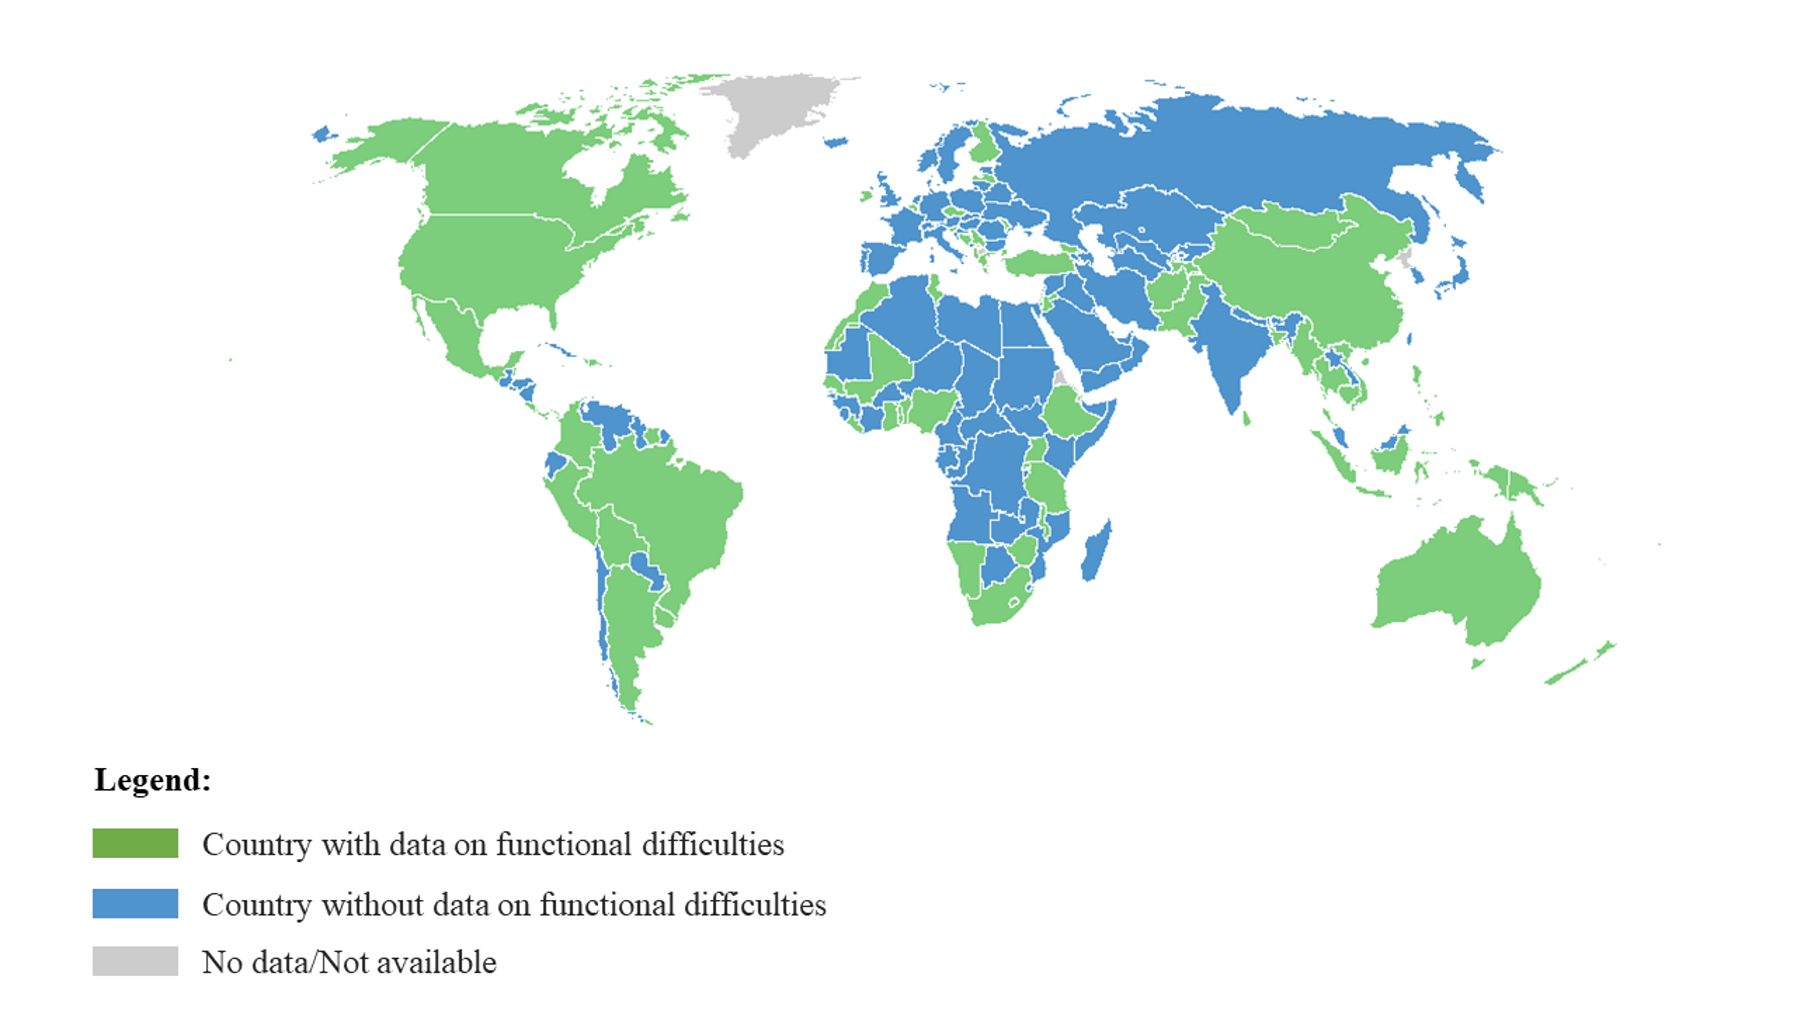 Map of the world showing countries with and without functional difficulty questions on national censuses or surveys.